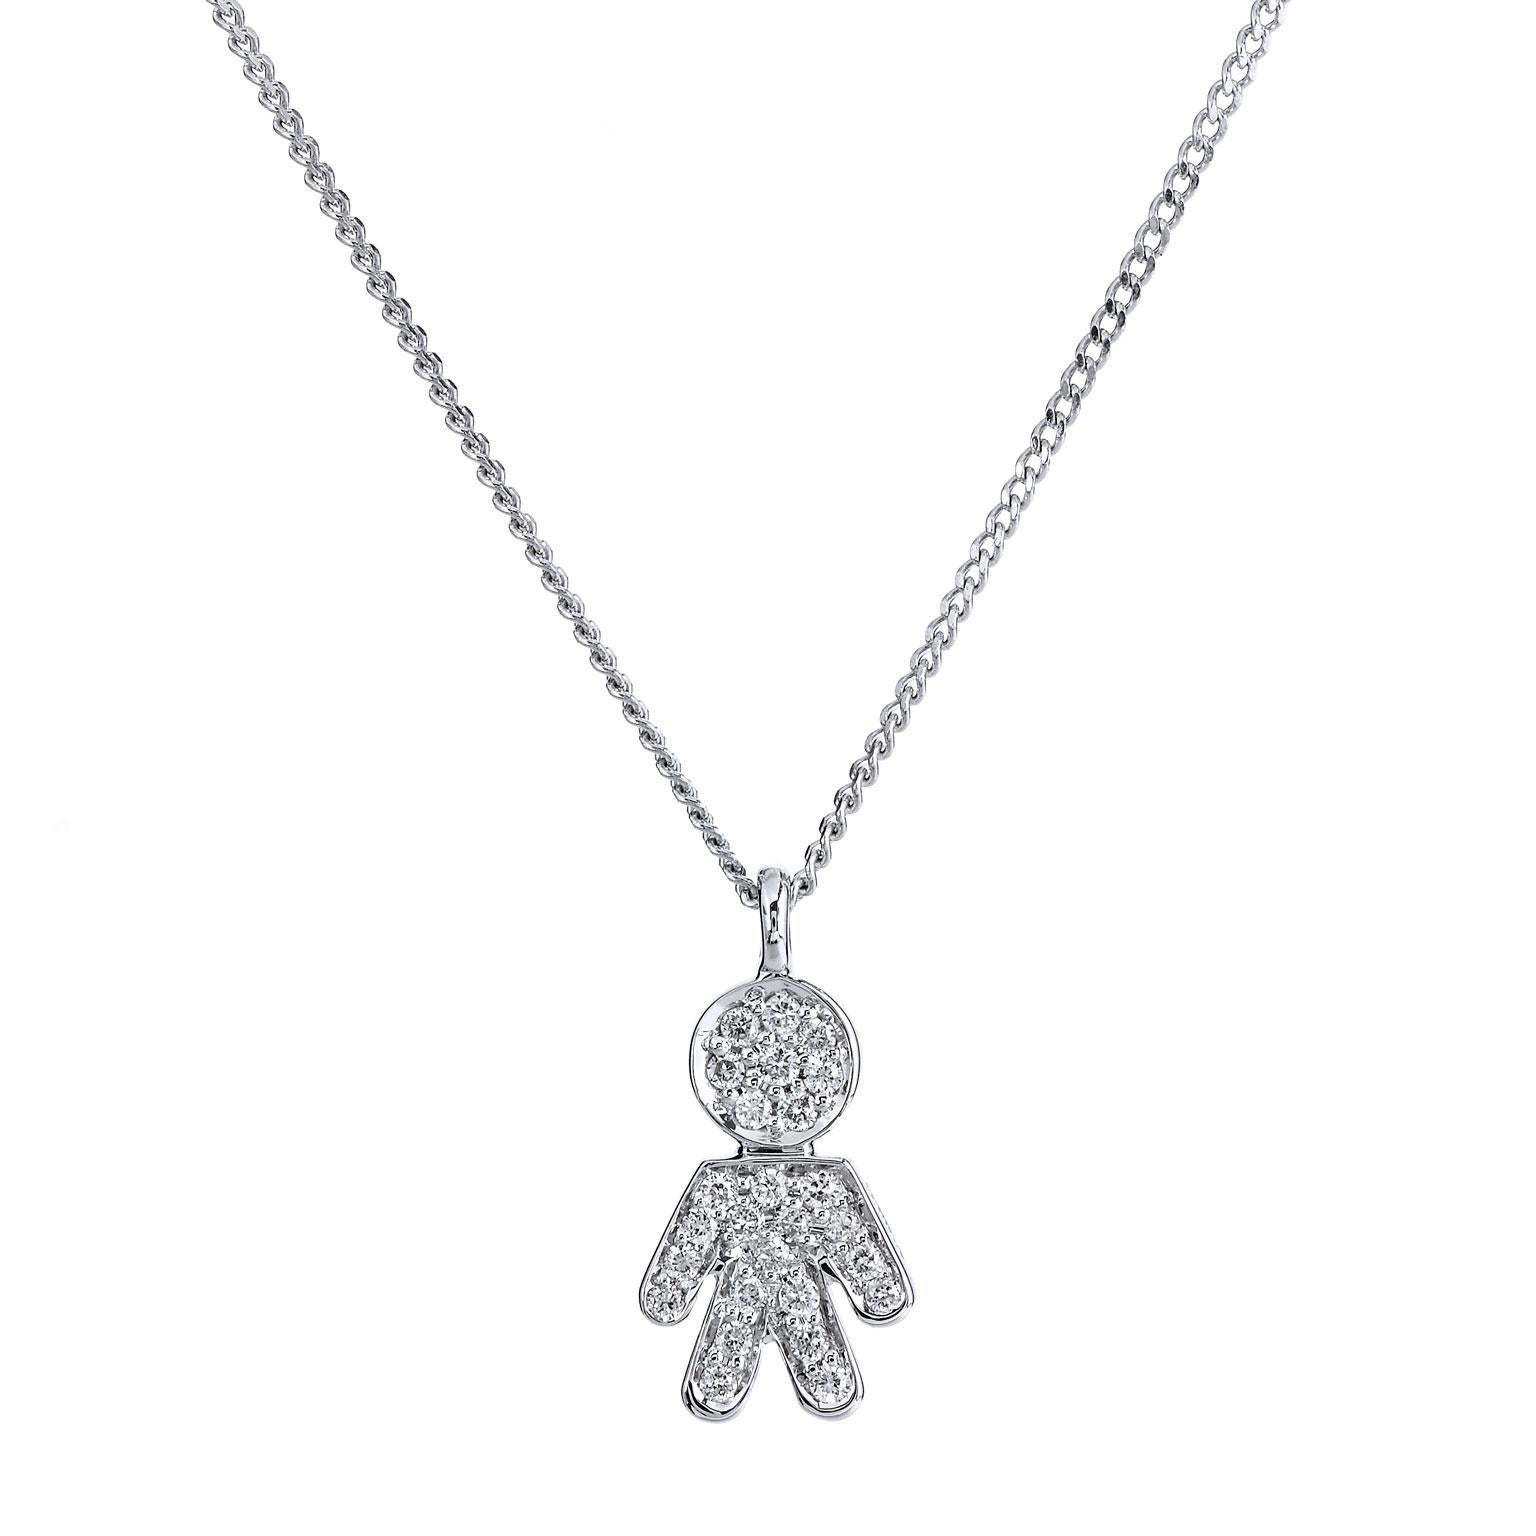 Diamond Boy Charm Pendant Necklace 0.12 Carat 18 Karat White Gold

This adorable boy charm is so sweet!  It measures 11 x 7 mm at it's widest.  The necklace and pendant are created in 18 karat white gold, featuring 0.12 carats of pave set